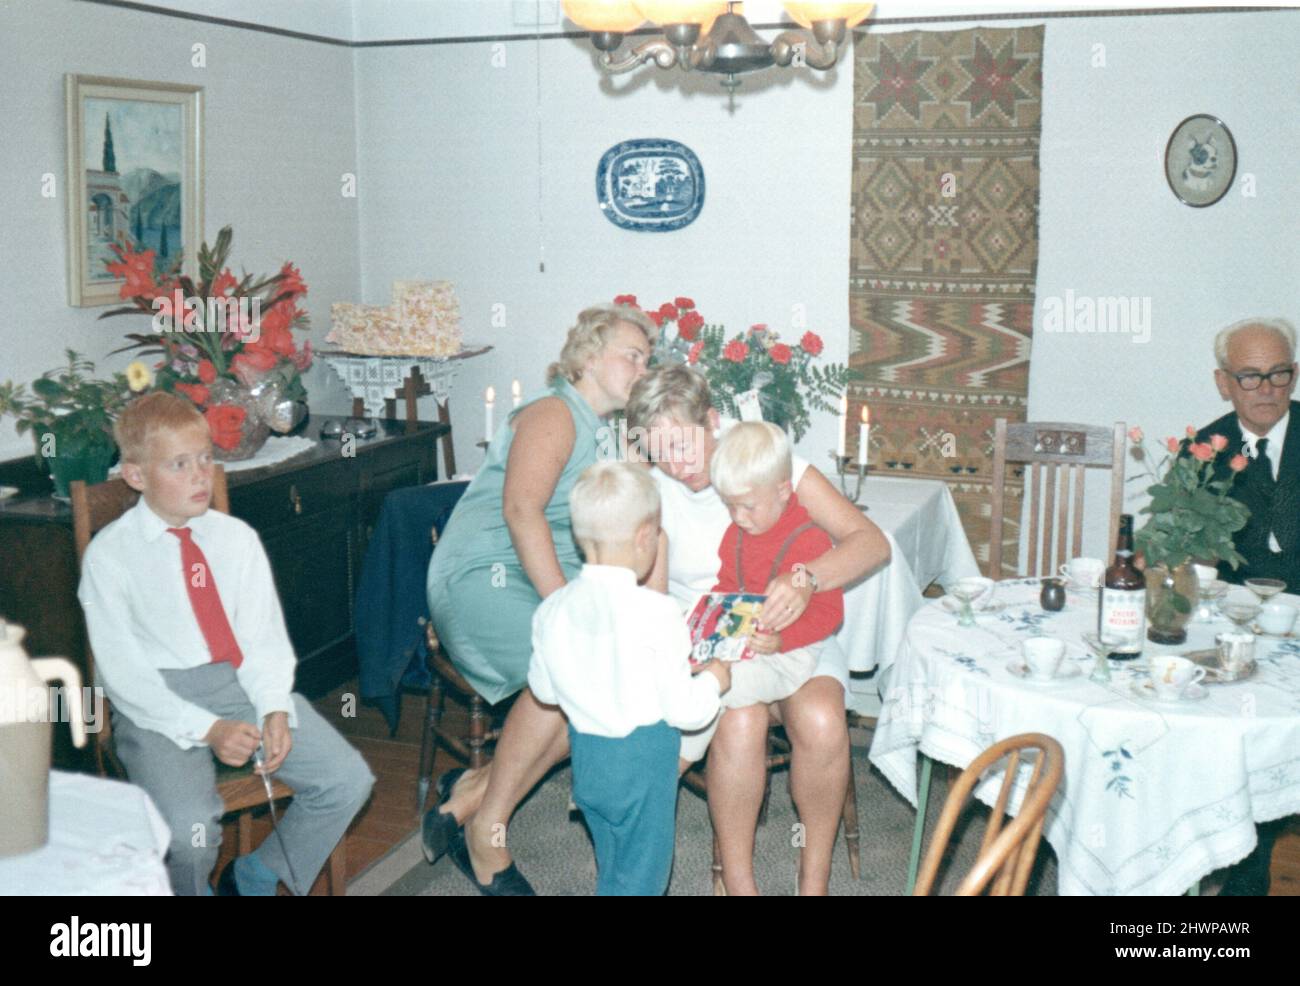 1970's original photograph of Swedish family smartly dressed indoors, Sweden. Concept of togetherness, yesteryear, nostalgia Stock Photo